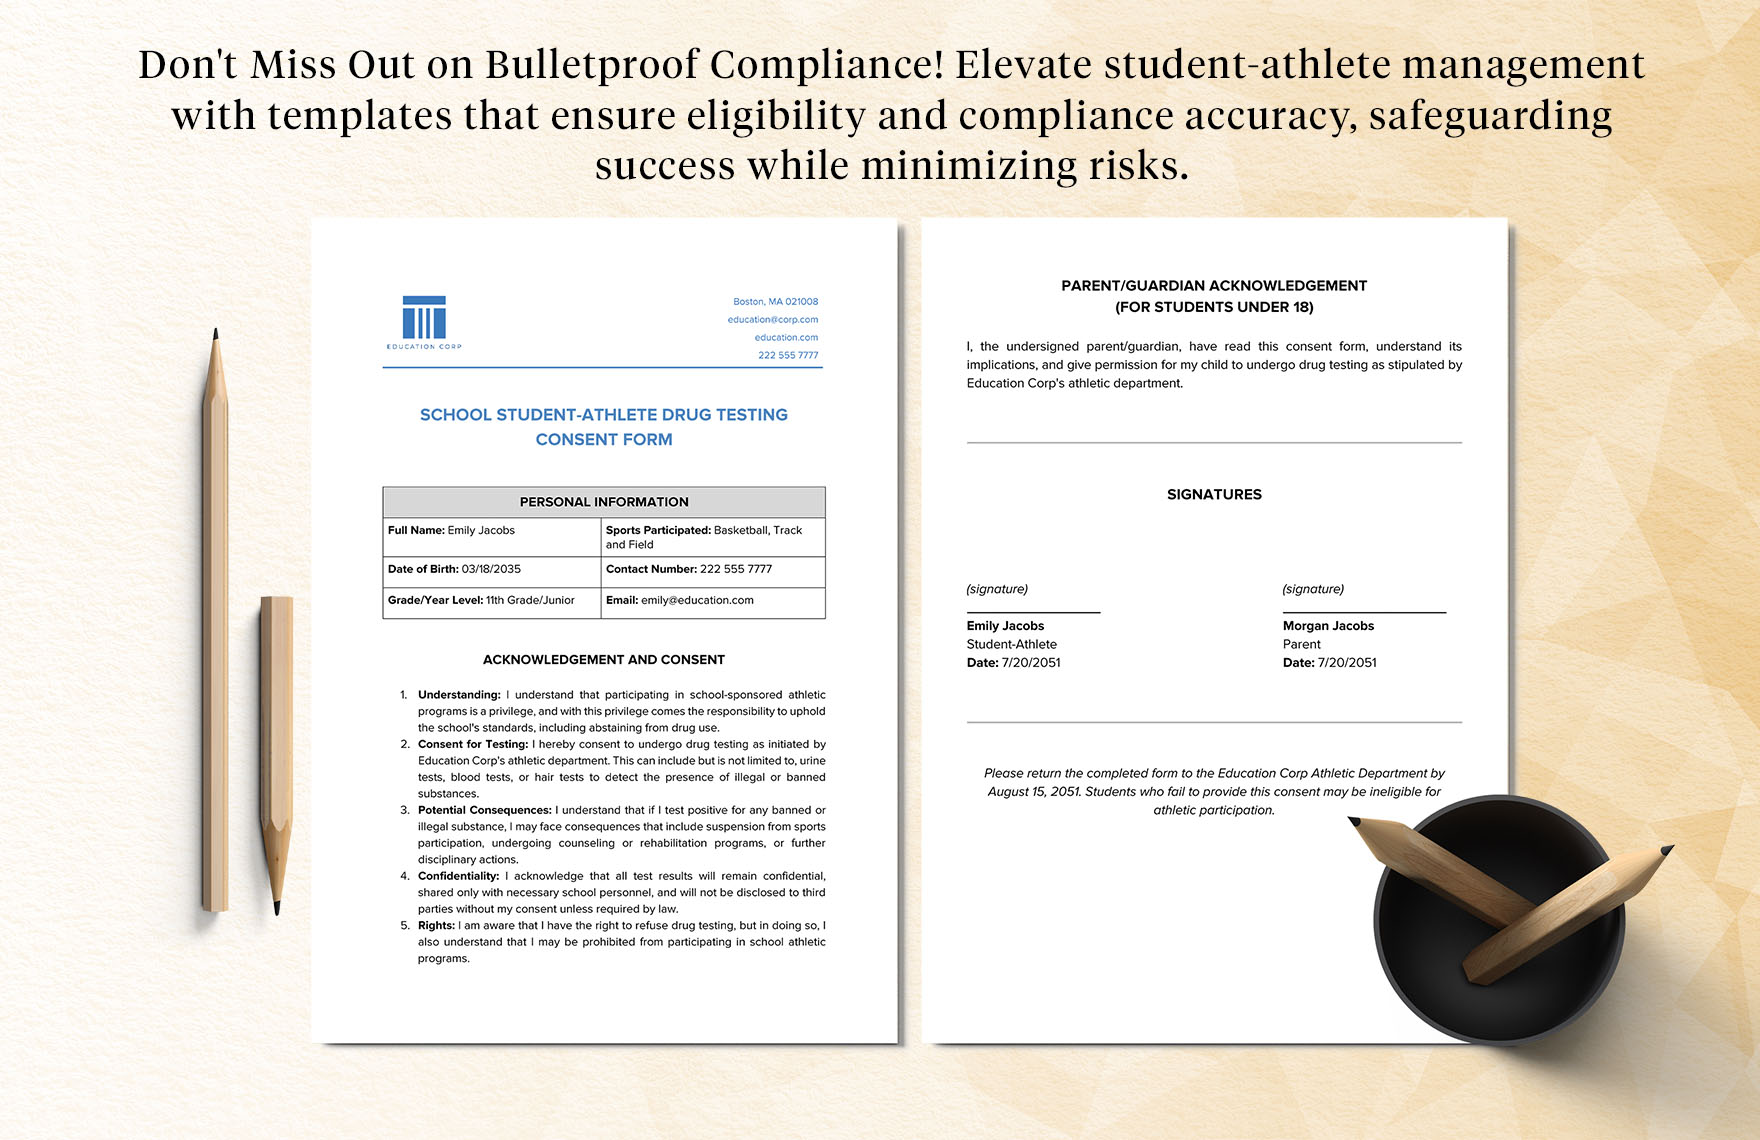 School Student-Athlete Drug Testing Consent Form Template